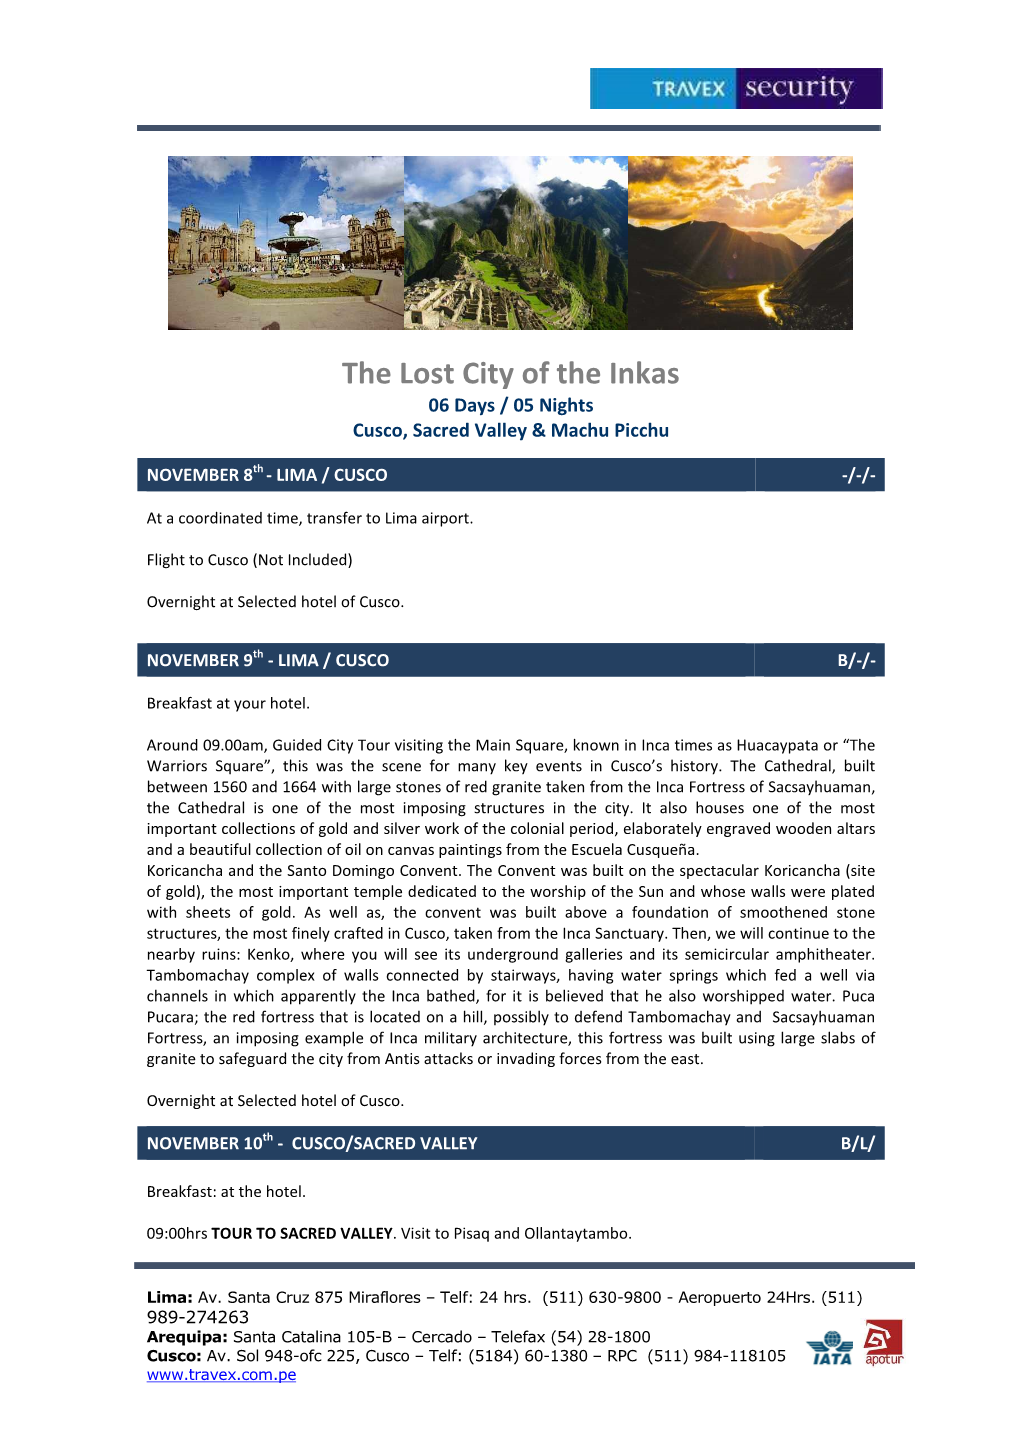 Lost City of the Inkas 06 Days / 05 Nights Cusco, Sacred Valley & Machu Picchu